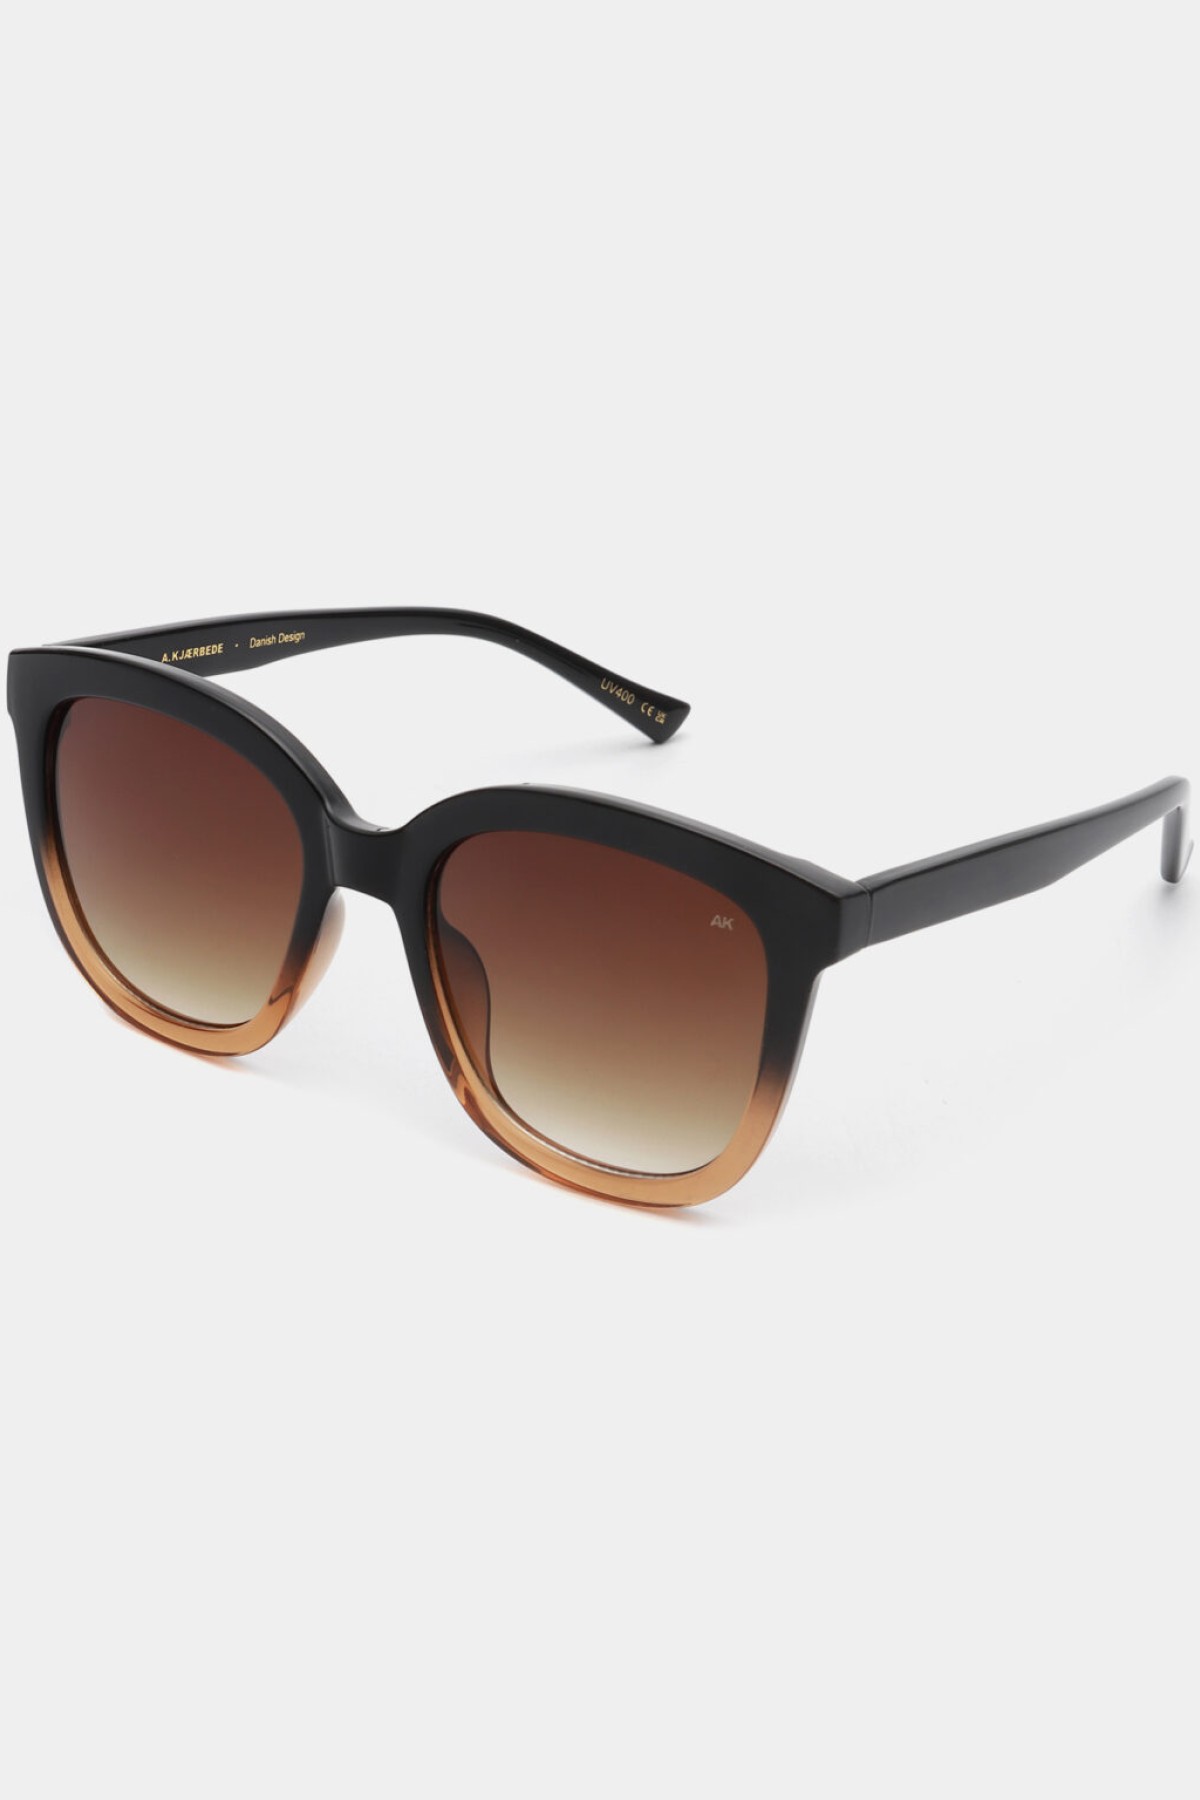 SUNGLASSES BLACK/BROWN -  BILLY – UV 400 PROTECTION